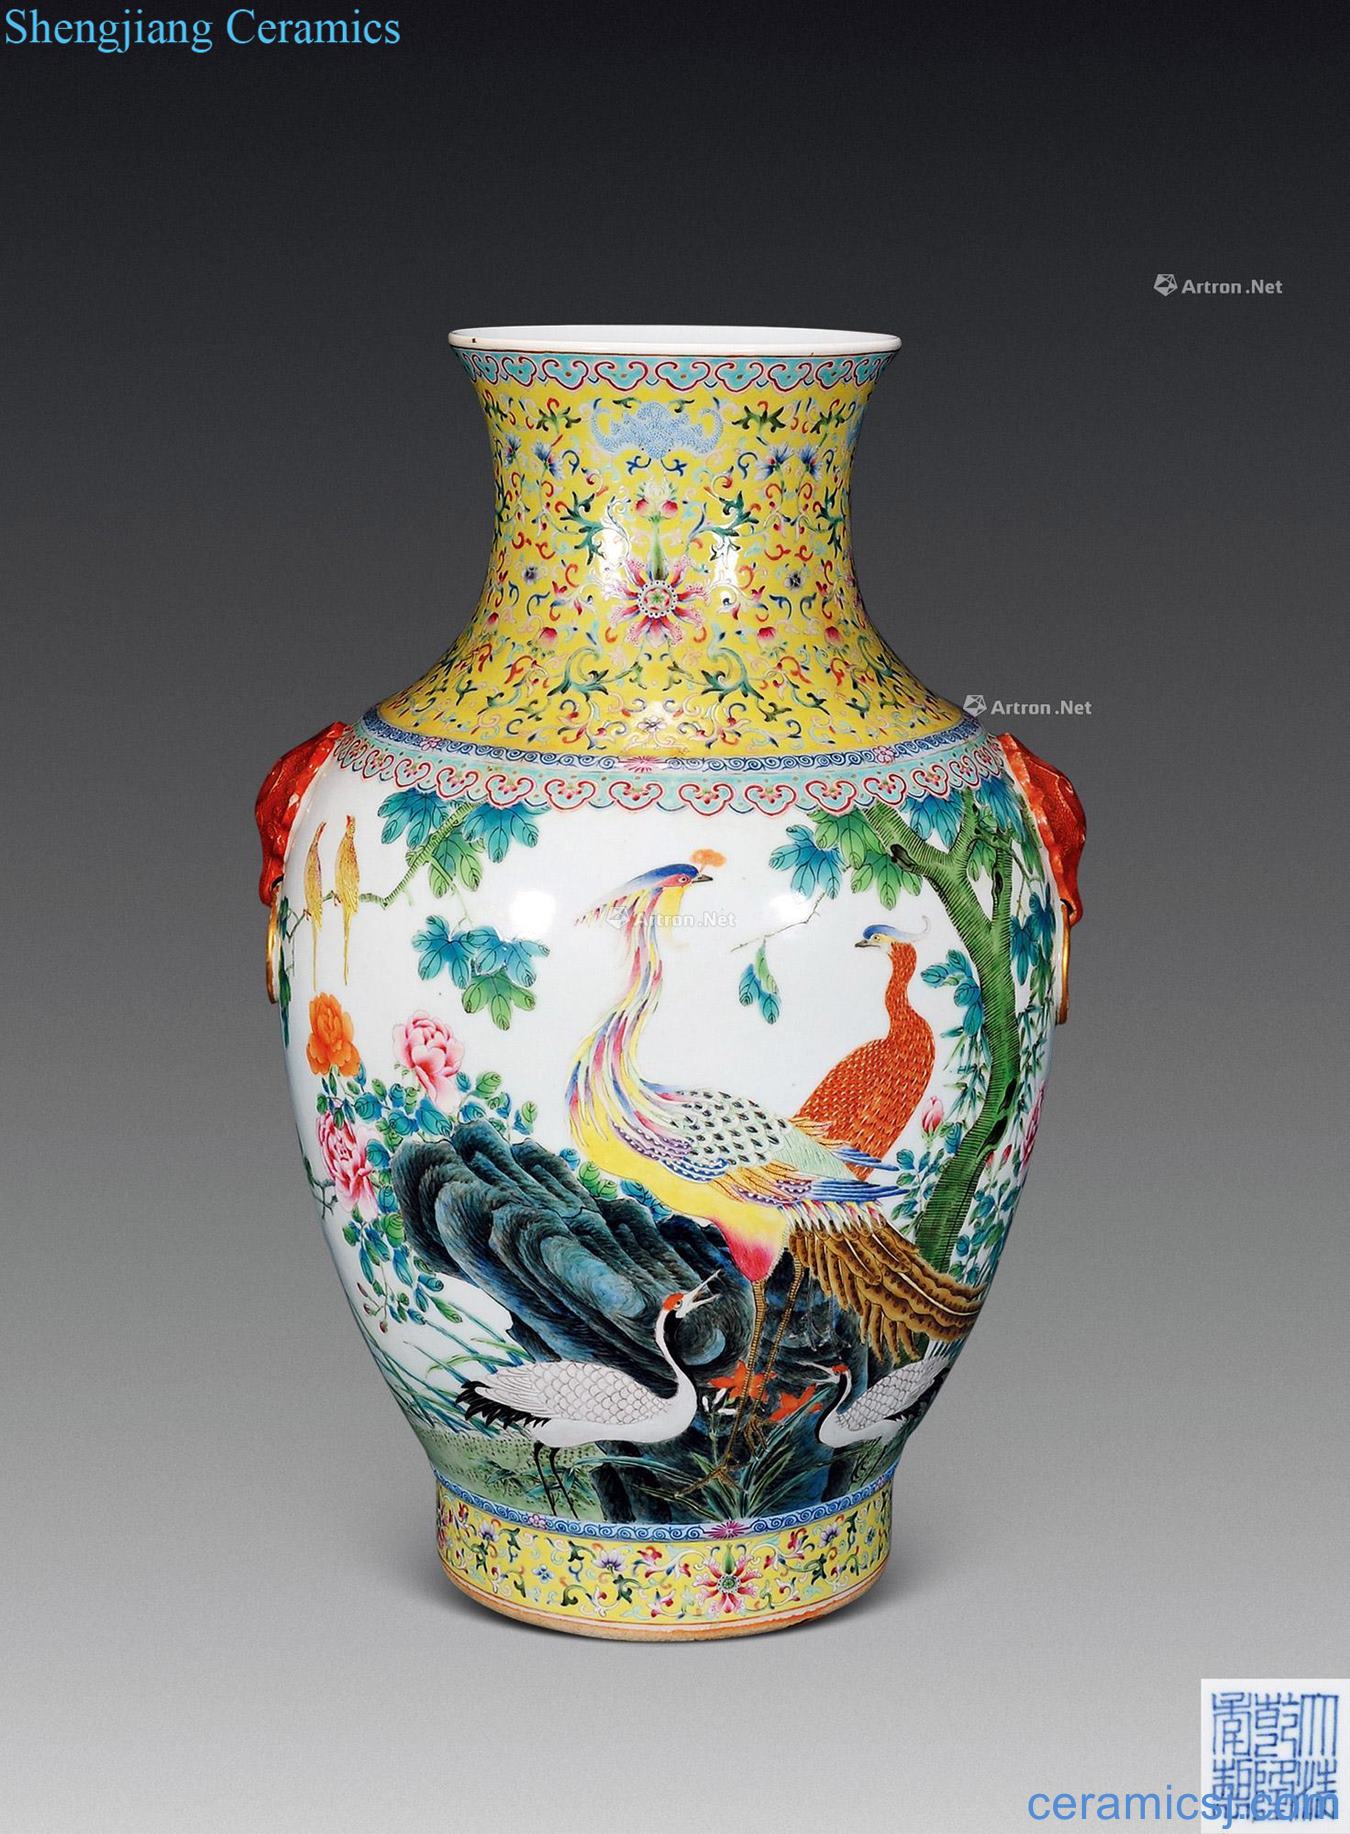 Pastel reign of qing emperor guangxu "acquisition of figure" grain shop is the first bottle